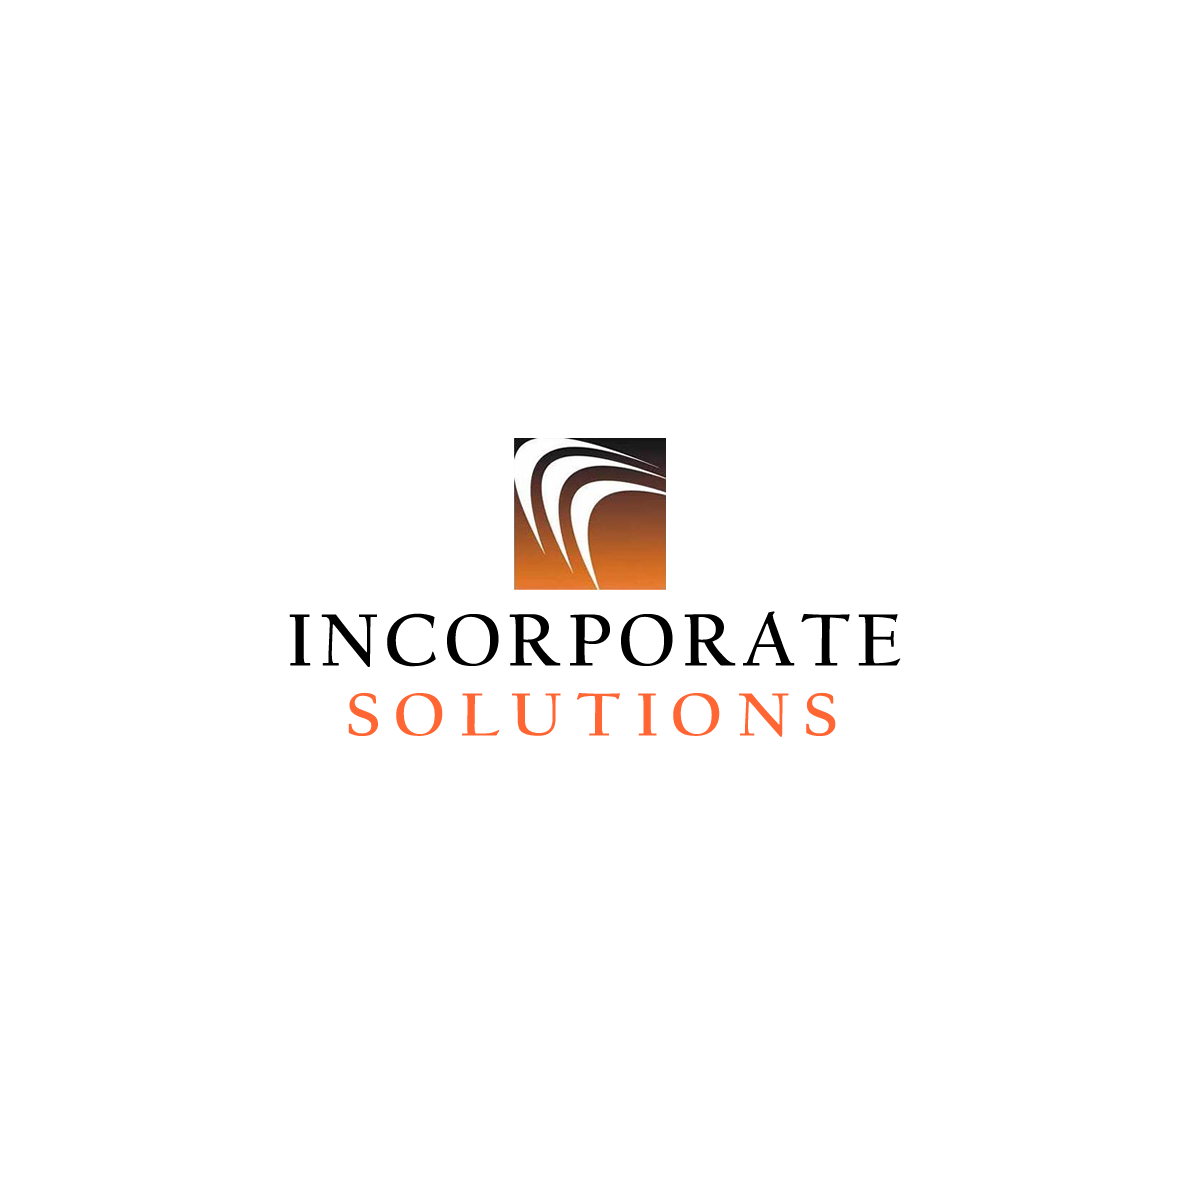 Virtual reception client logo - Incorporate solutions